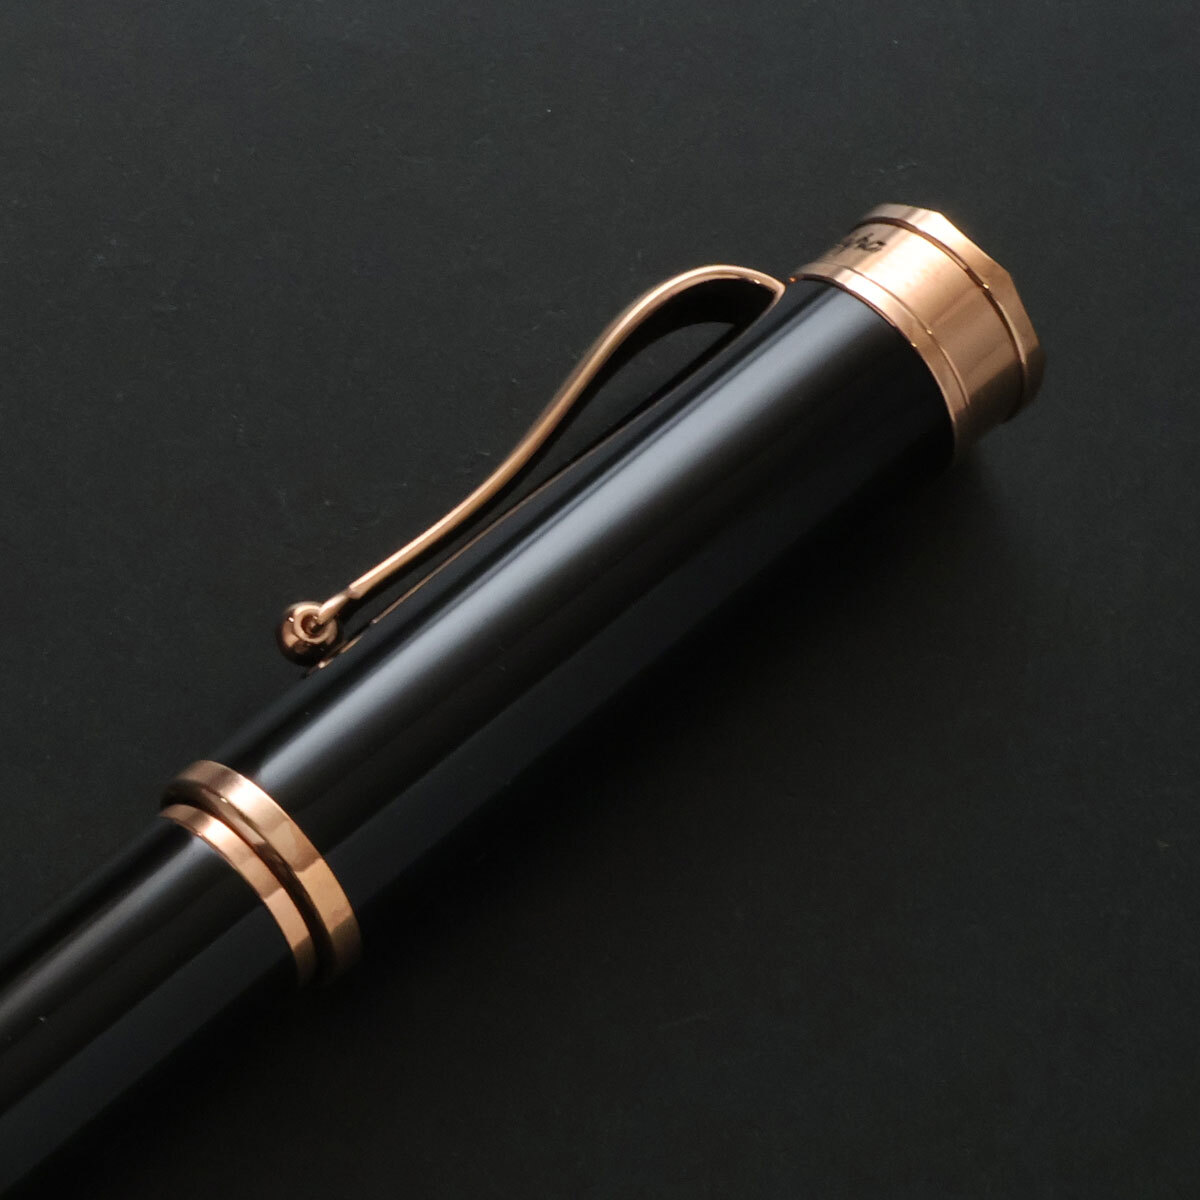 9102* Montegrappa * fountain pen * regular price 41,800 jpy *du car re* black & pink gold * Precious resin *Montegrappa Italy made * new goods 